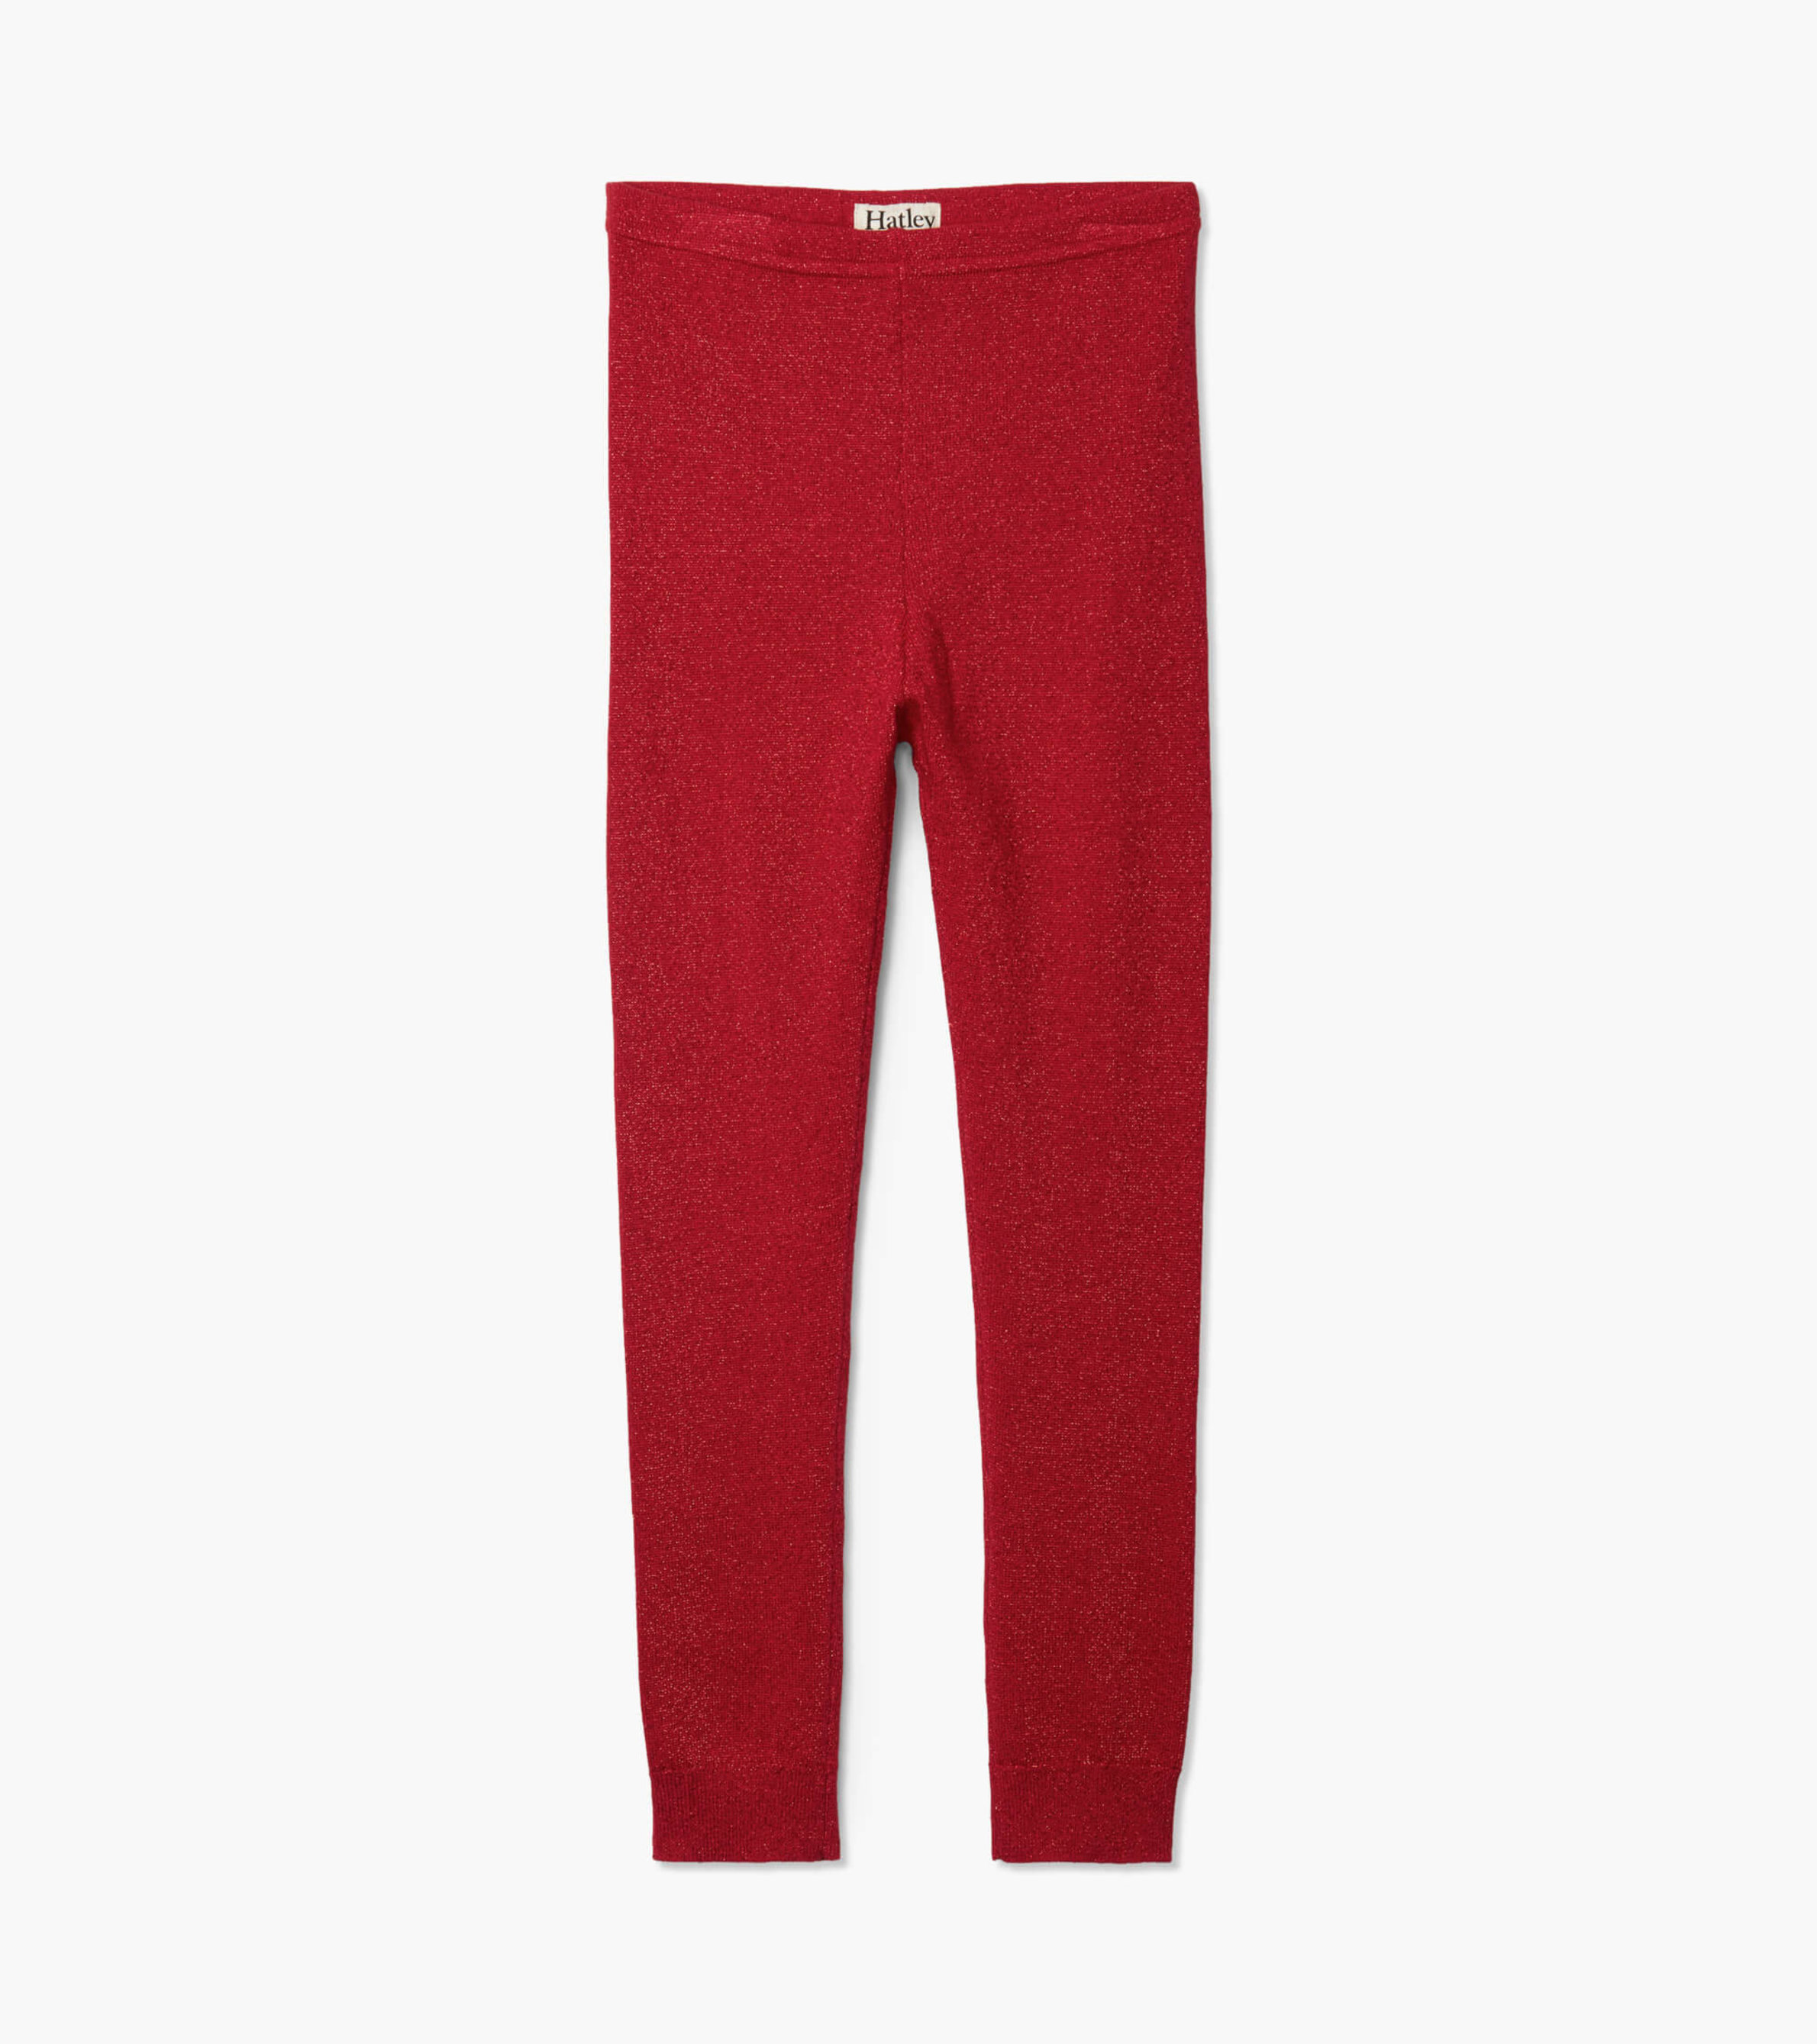 https://cdn.hatley.com/product_images/red-shimmer-cable-knit-tights/F00CGK1438_jpg/pdp_zoom.jpg?c=1695154322&locale=en